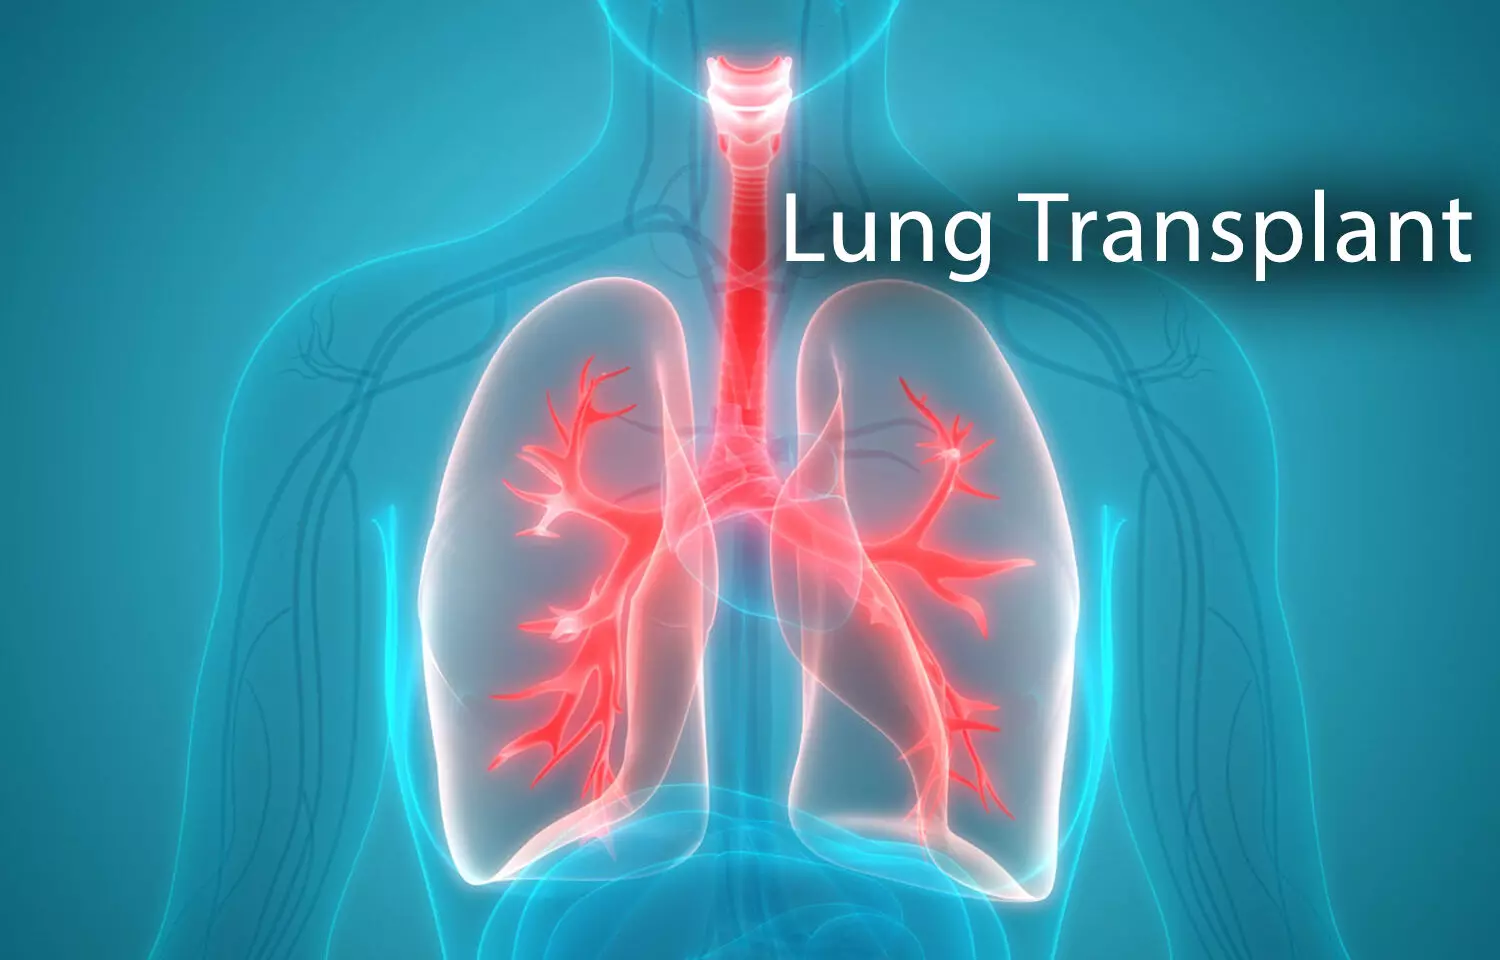 Recipient of lung transplant dies after receiving COVID-19 infected lungs: Case Report